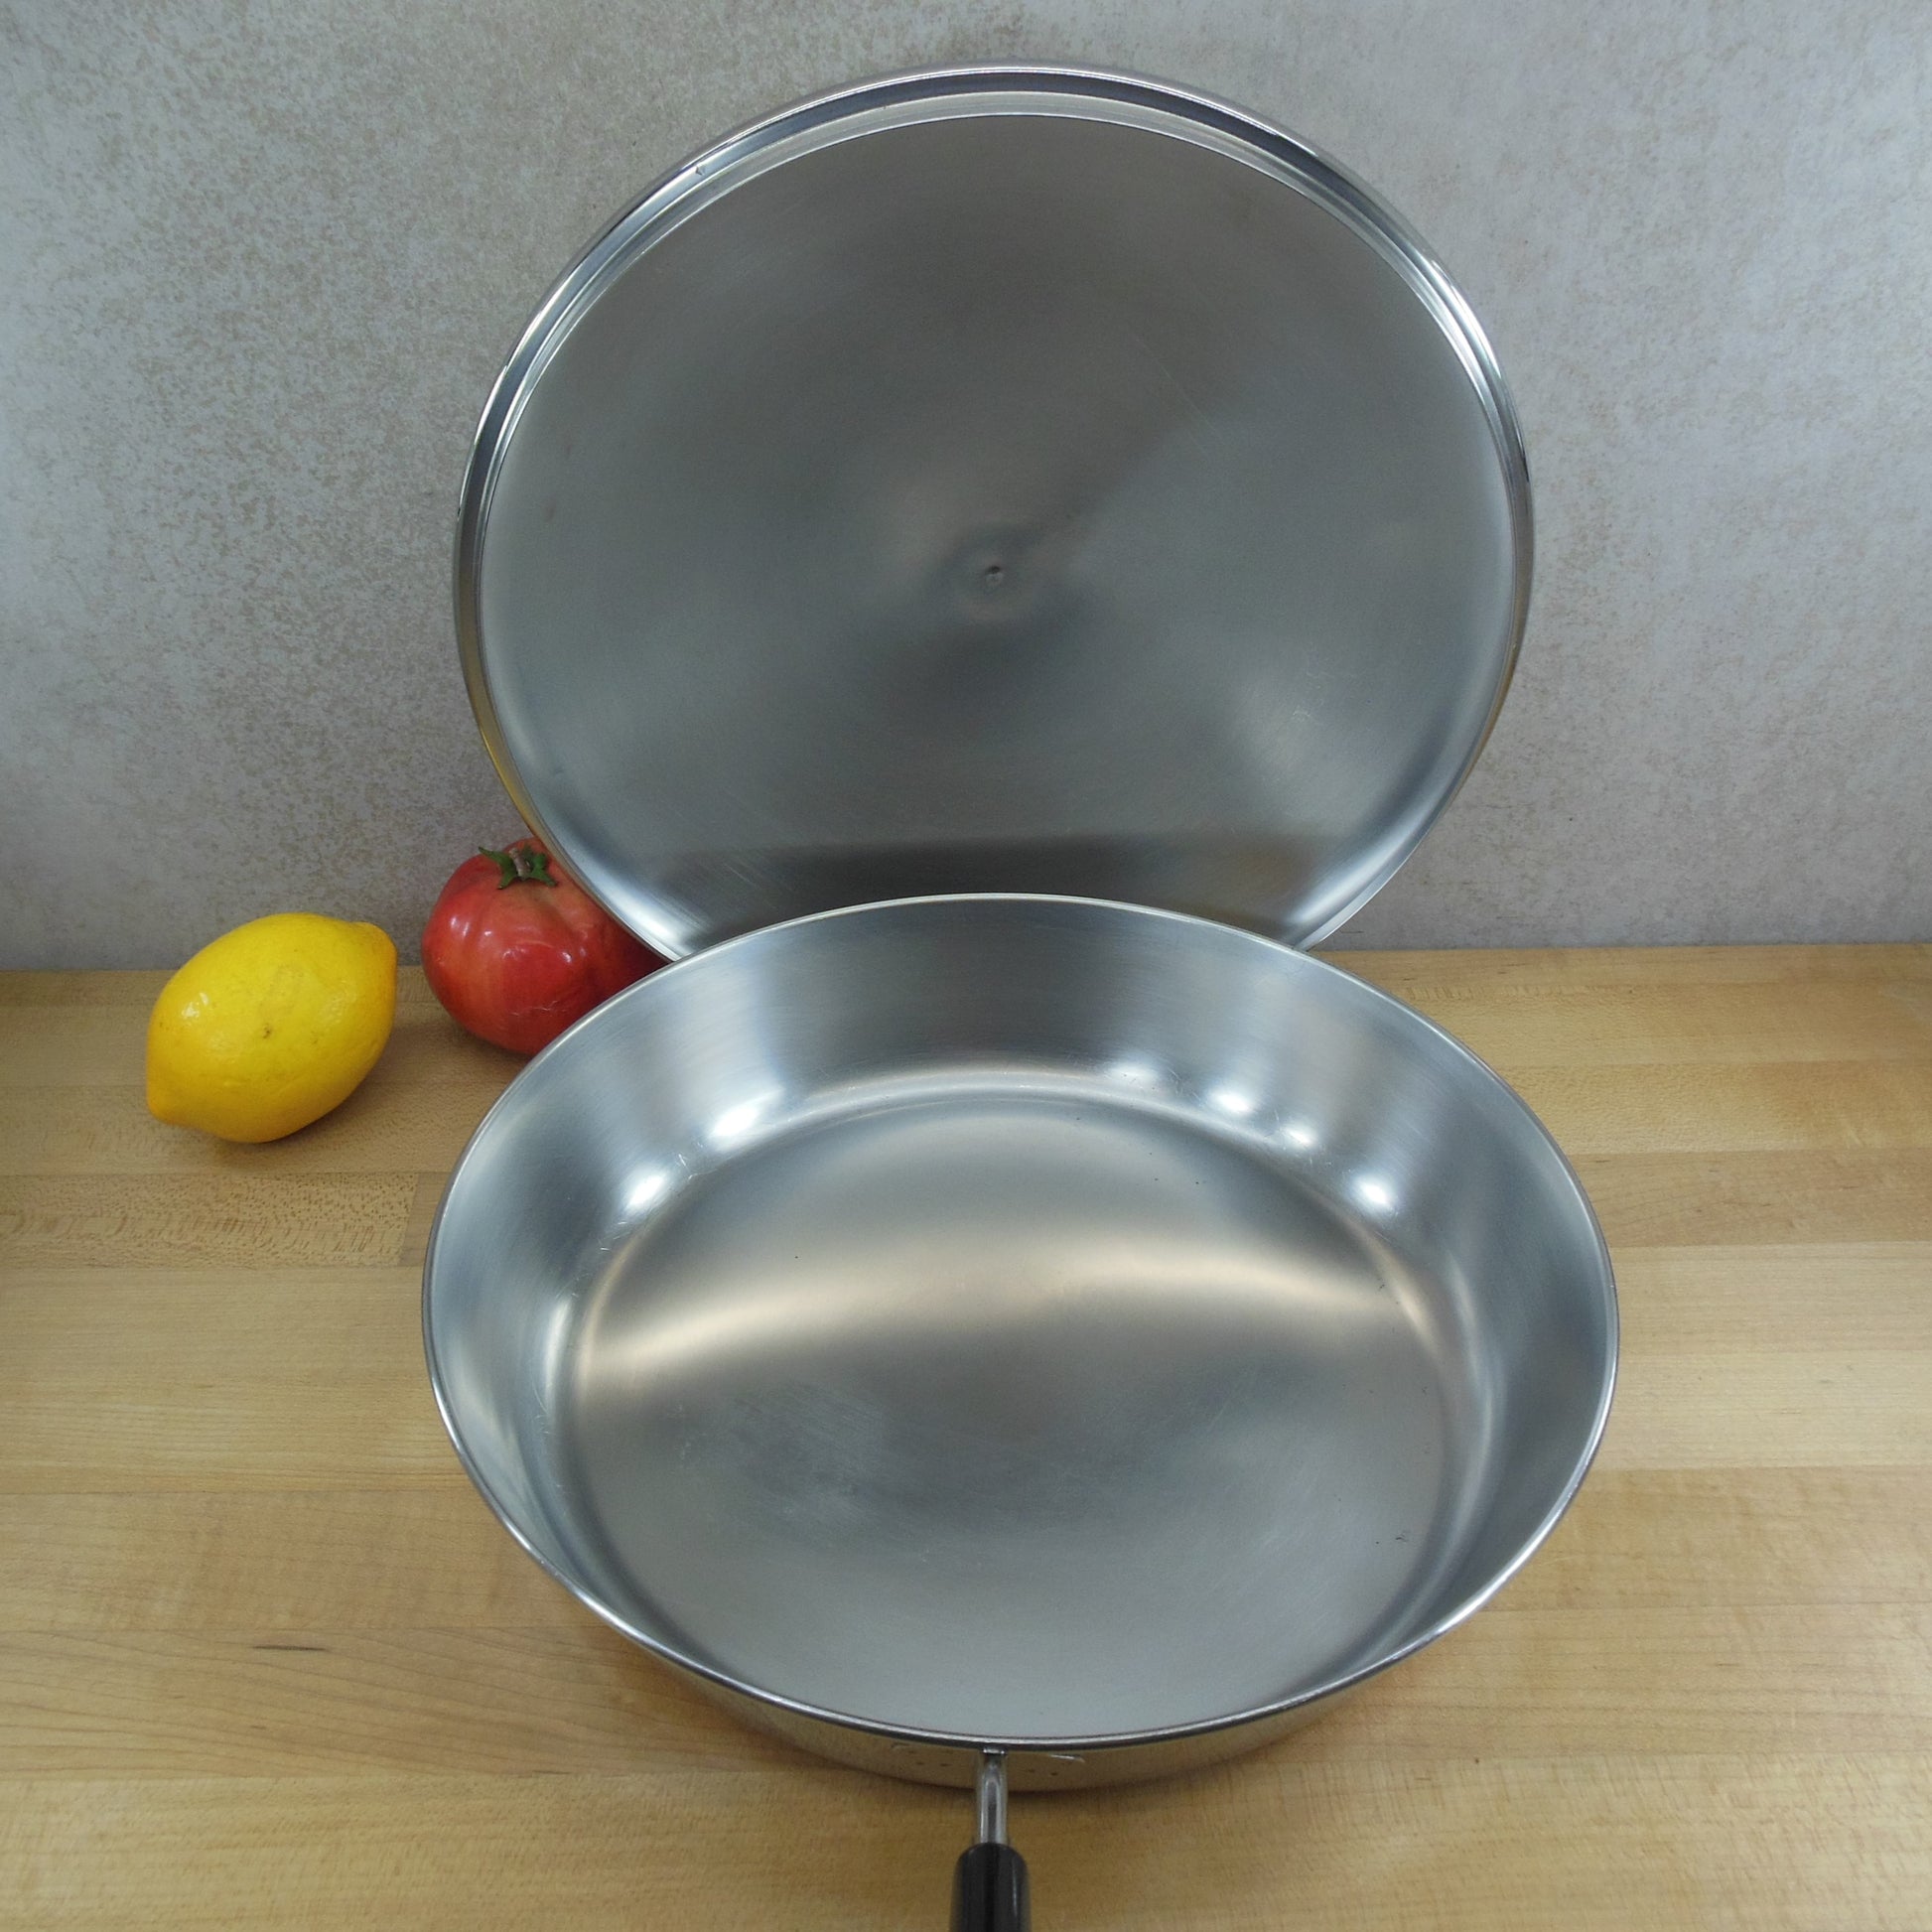 Revere Ware 12" Fry Pan Skillet Chicken Fryer Stainless Copper Clad 1994 Vintage